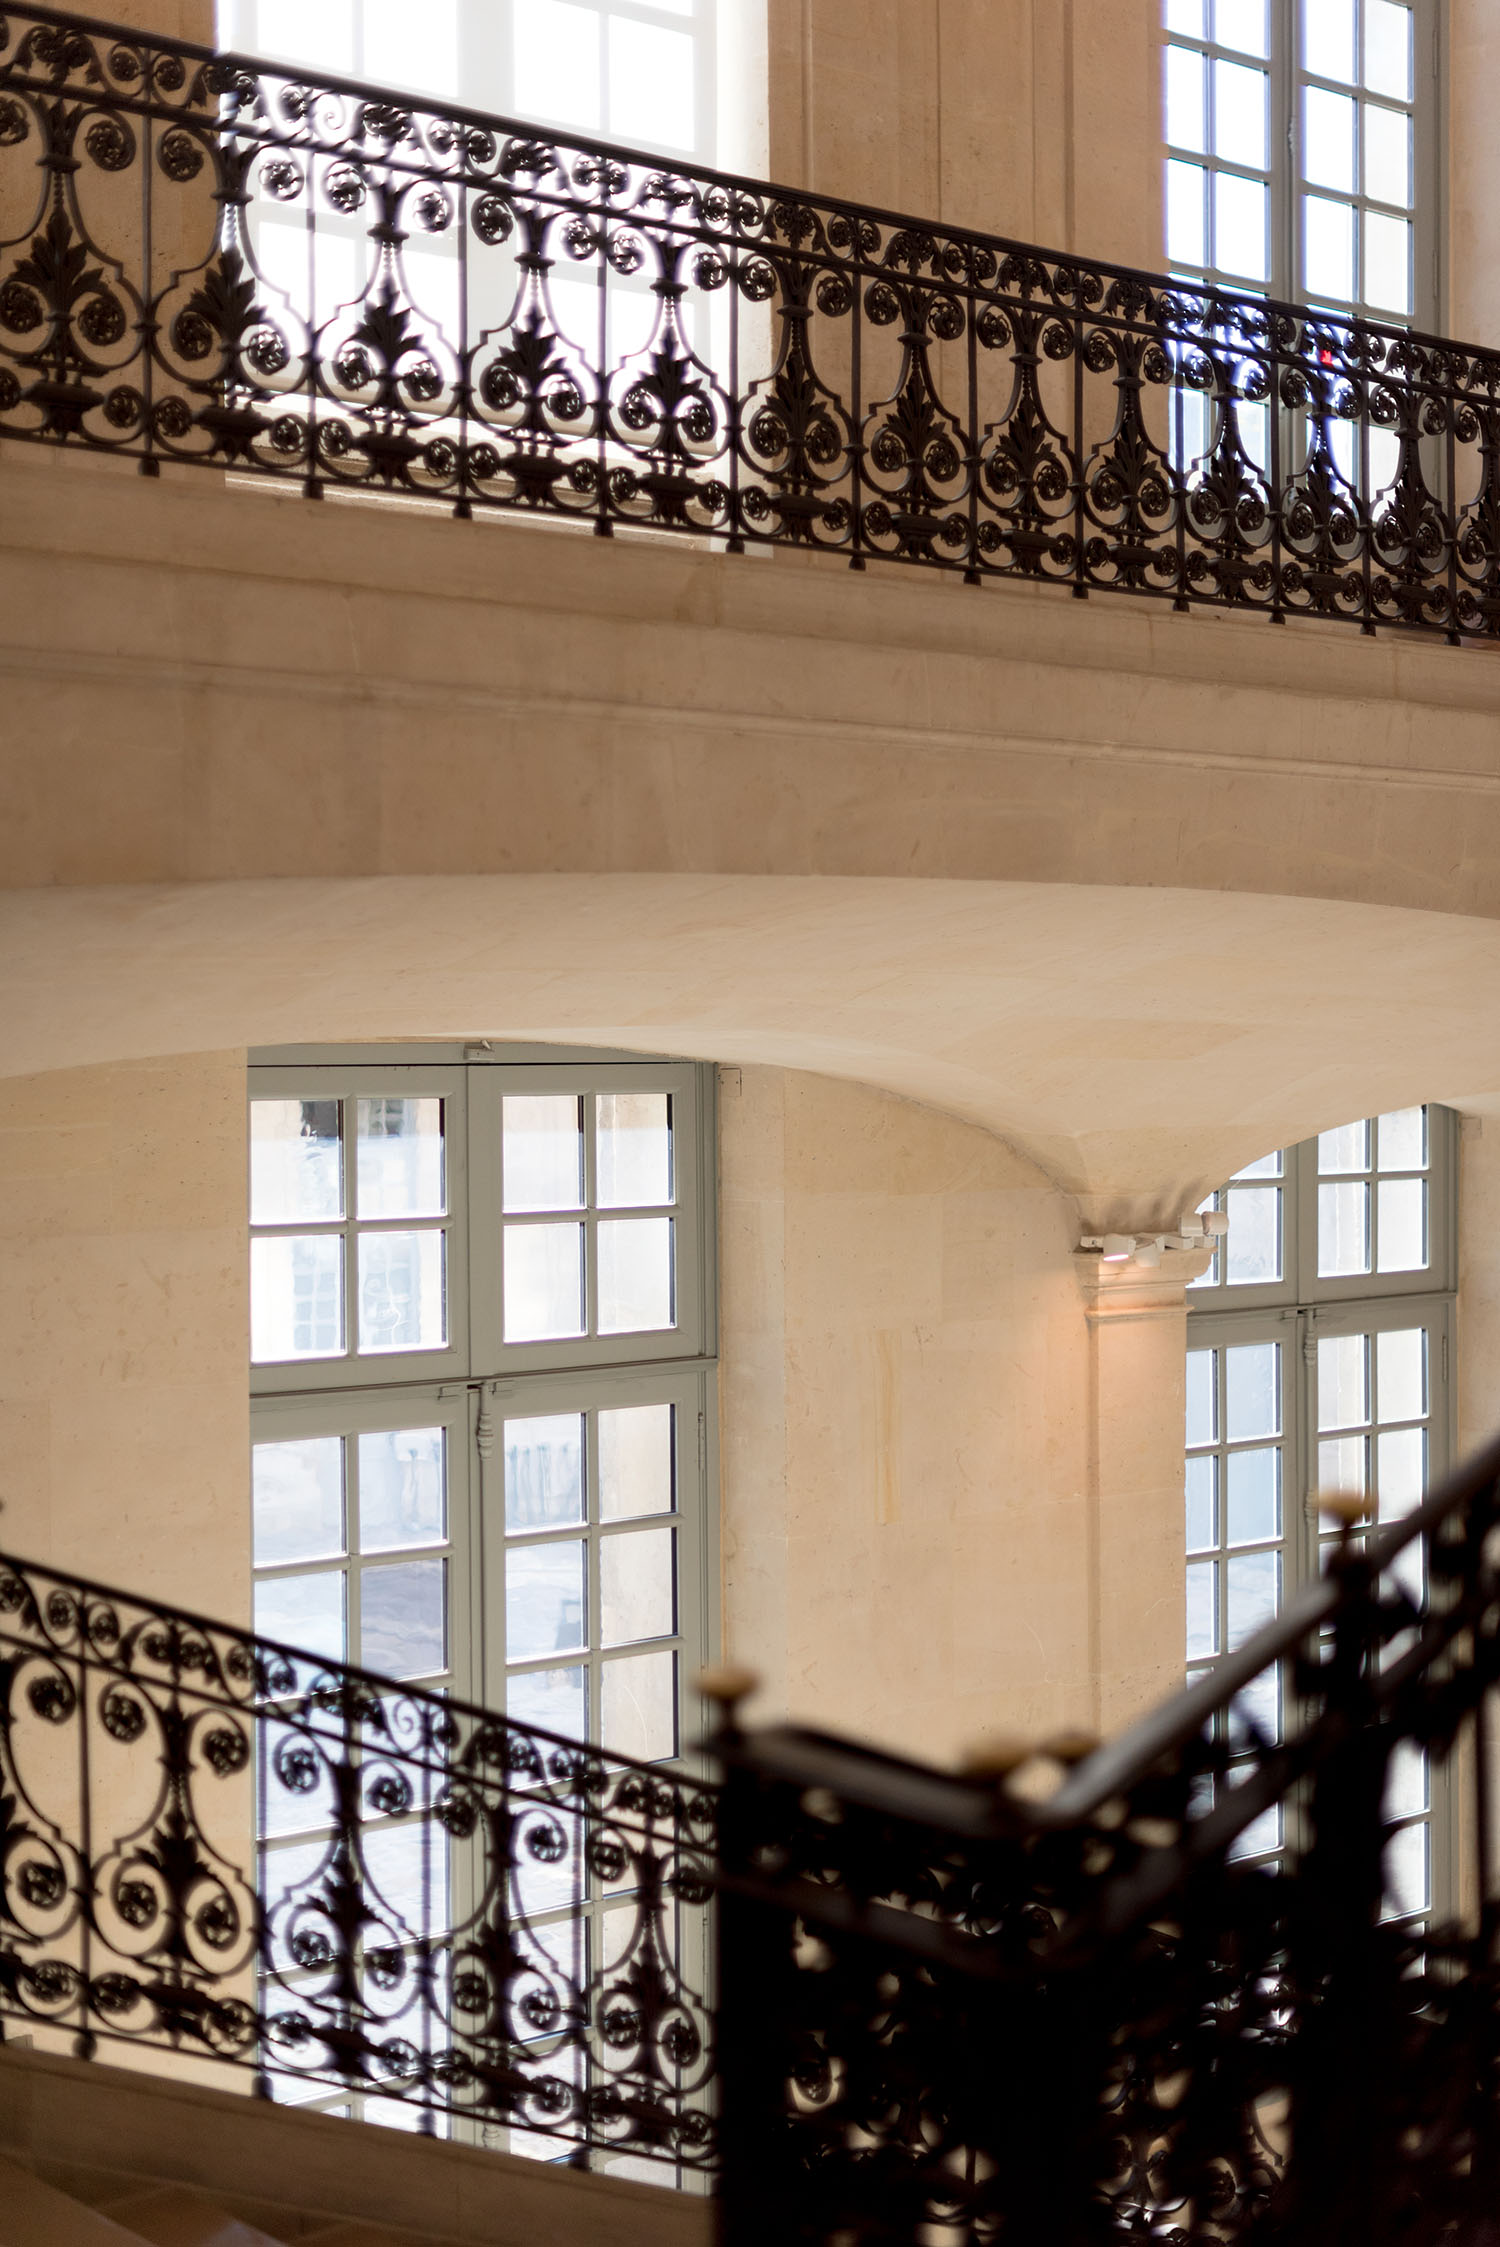 Coco & Vera - Staircases and windows at the Musee Picasso in le Marais